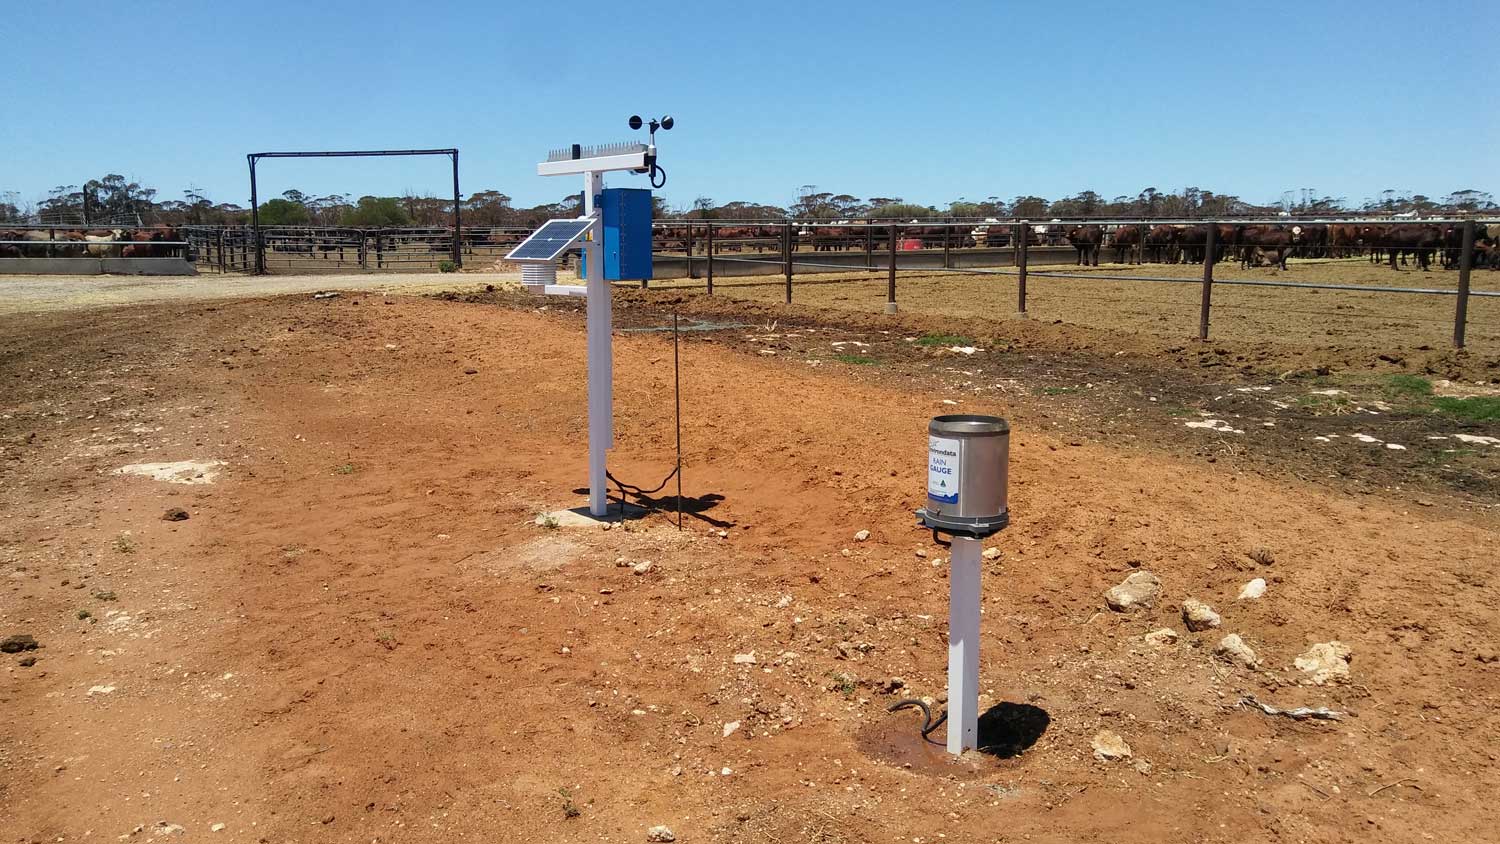 Feedlot Weather Station for Heat Stress Monitoring being serviced